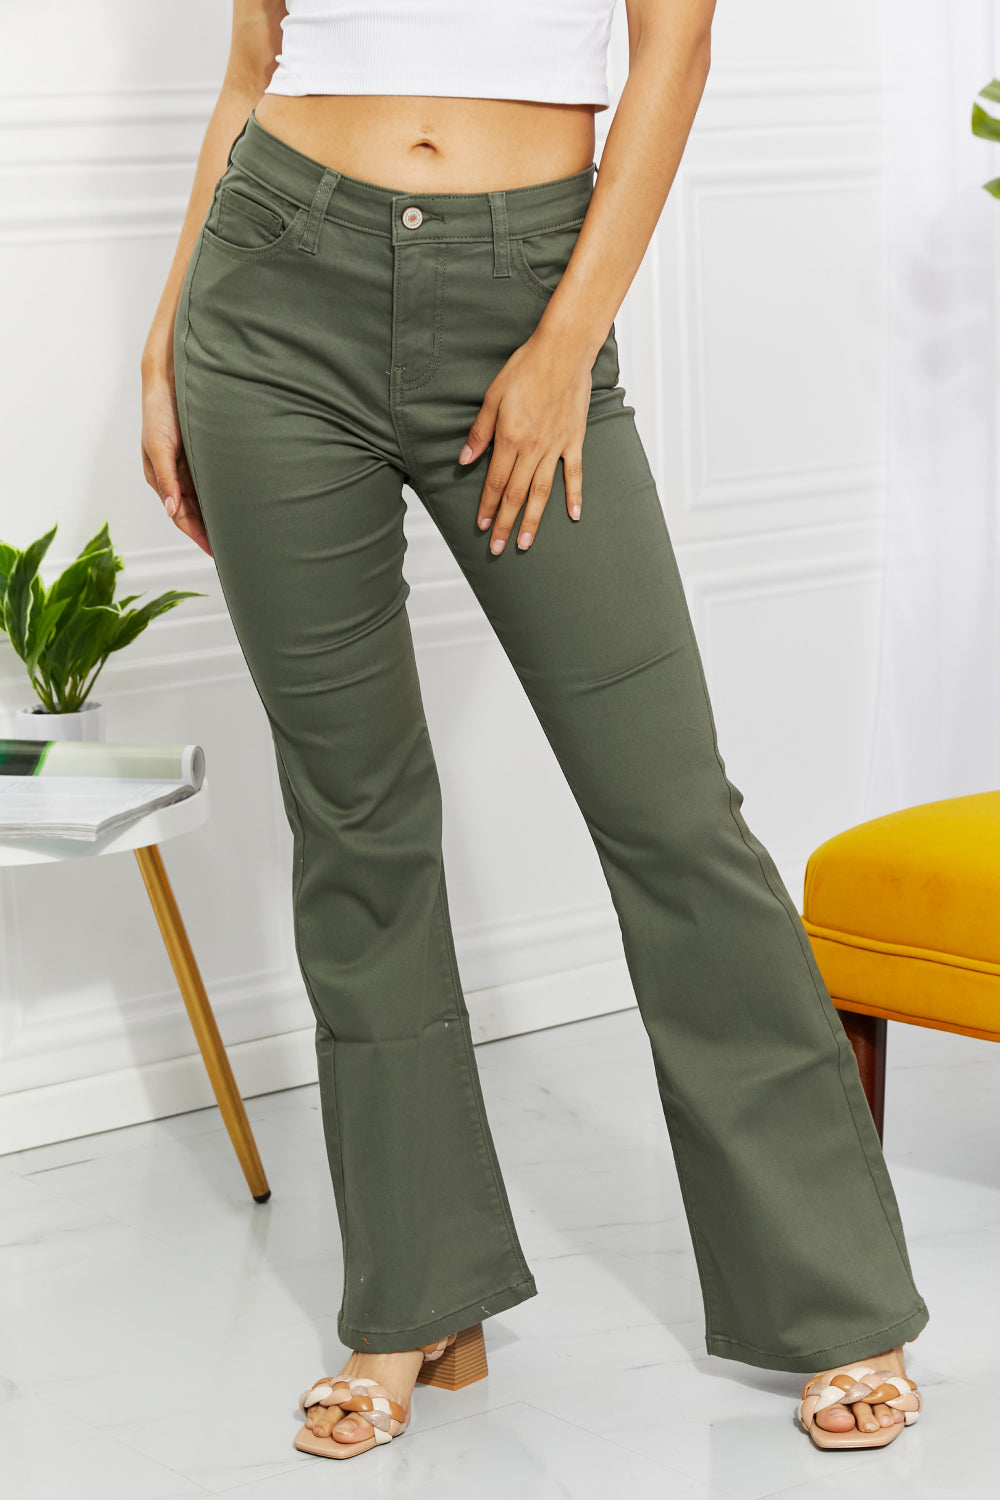 Zenana Clementine Full Size High-Rise Bootcut Jeans